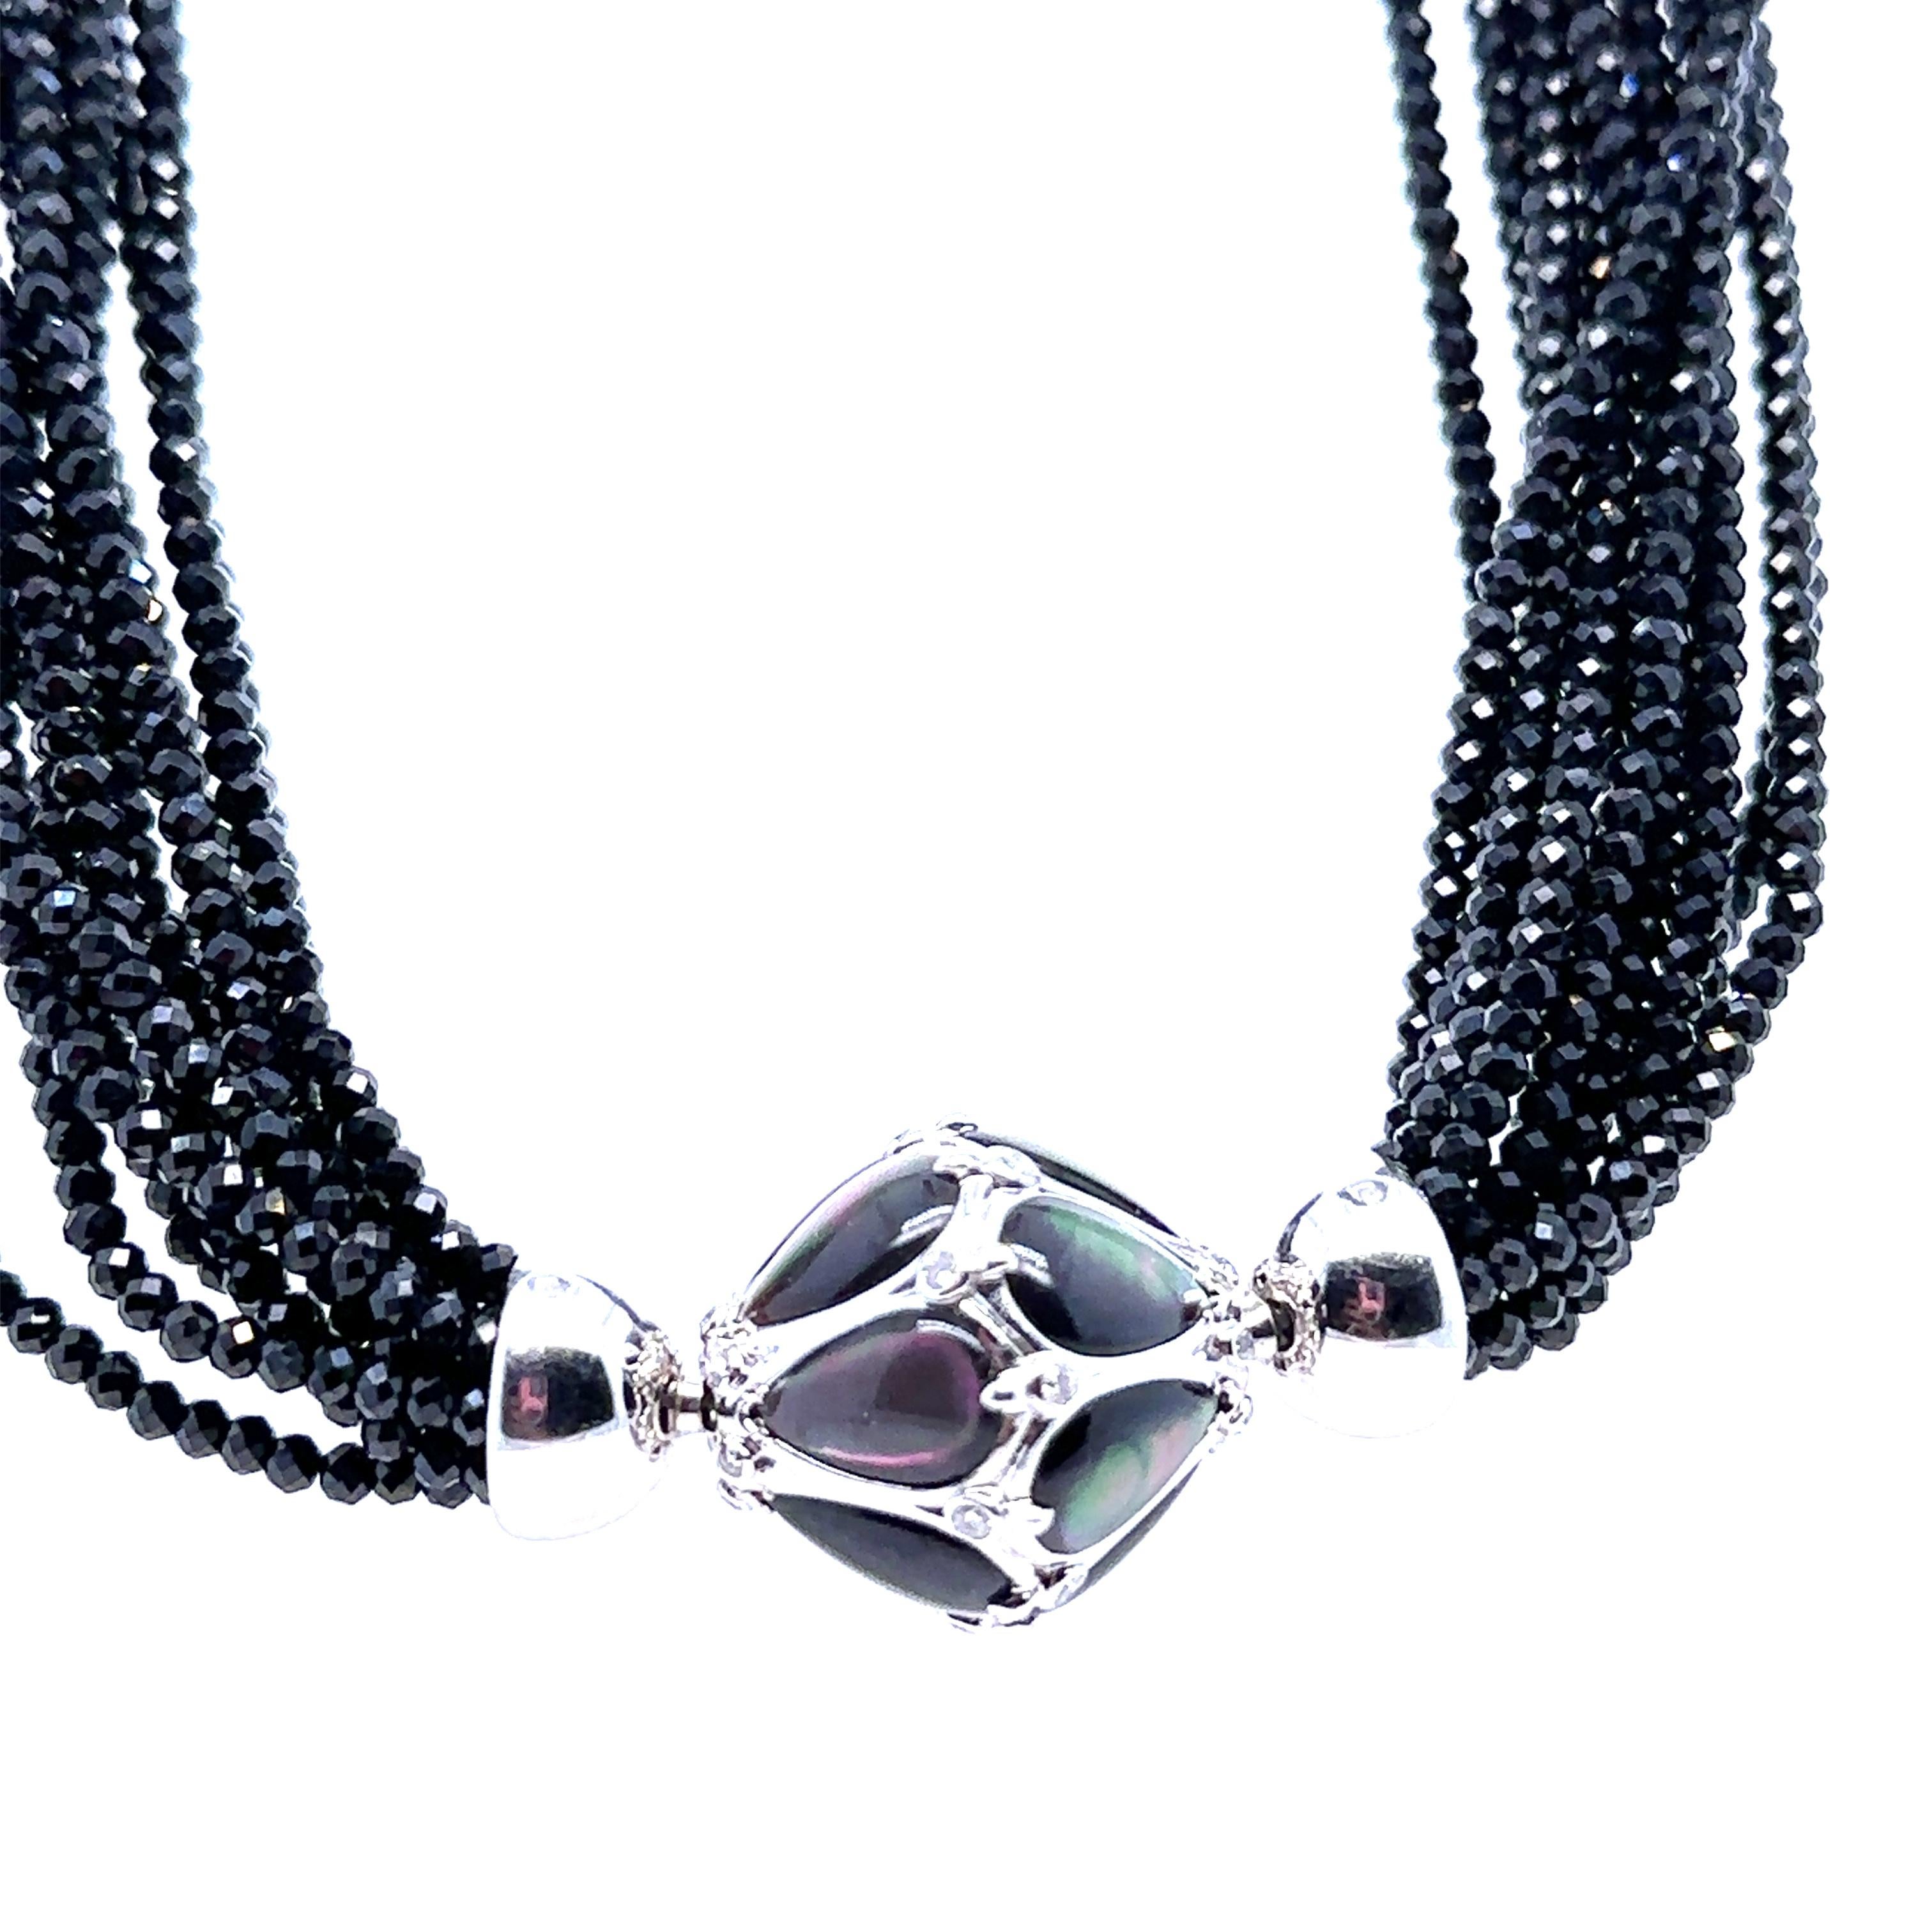 Paspaley Black Spinel Necklace 1